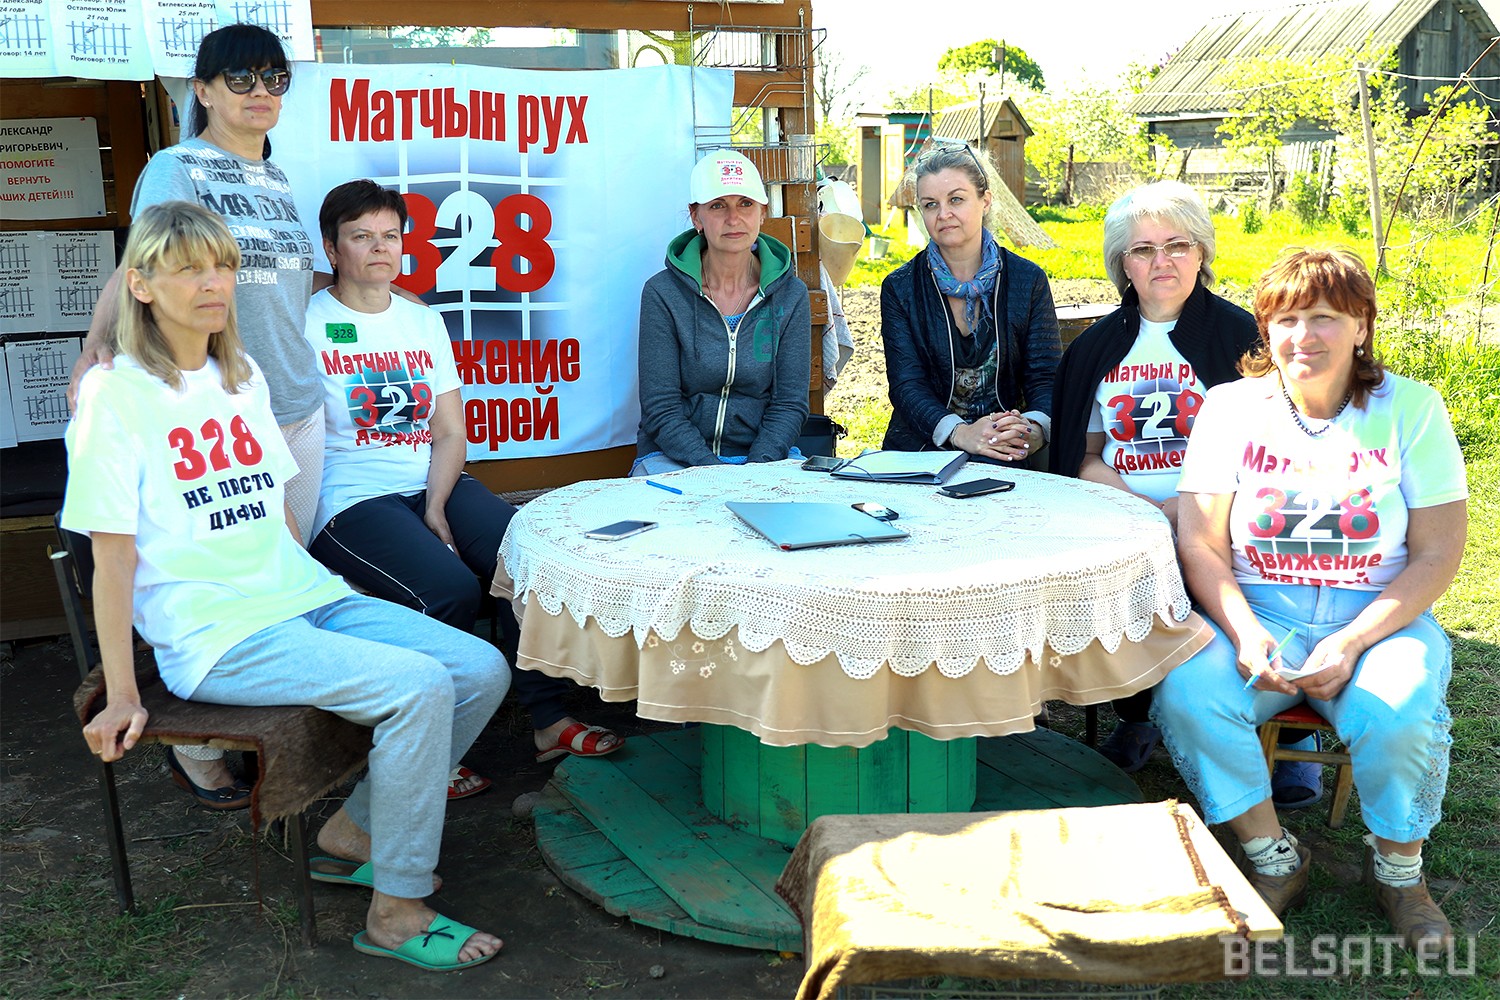 Mothers 328 with the support of political parties seek to soften anti-drug legislation